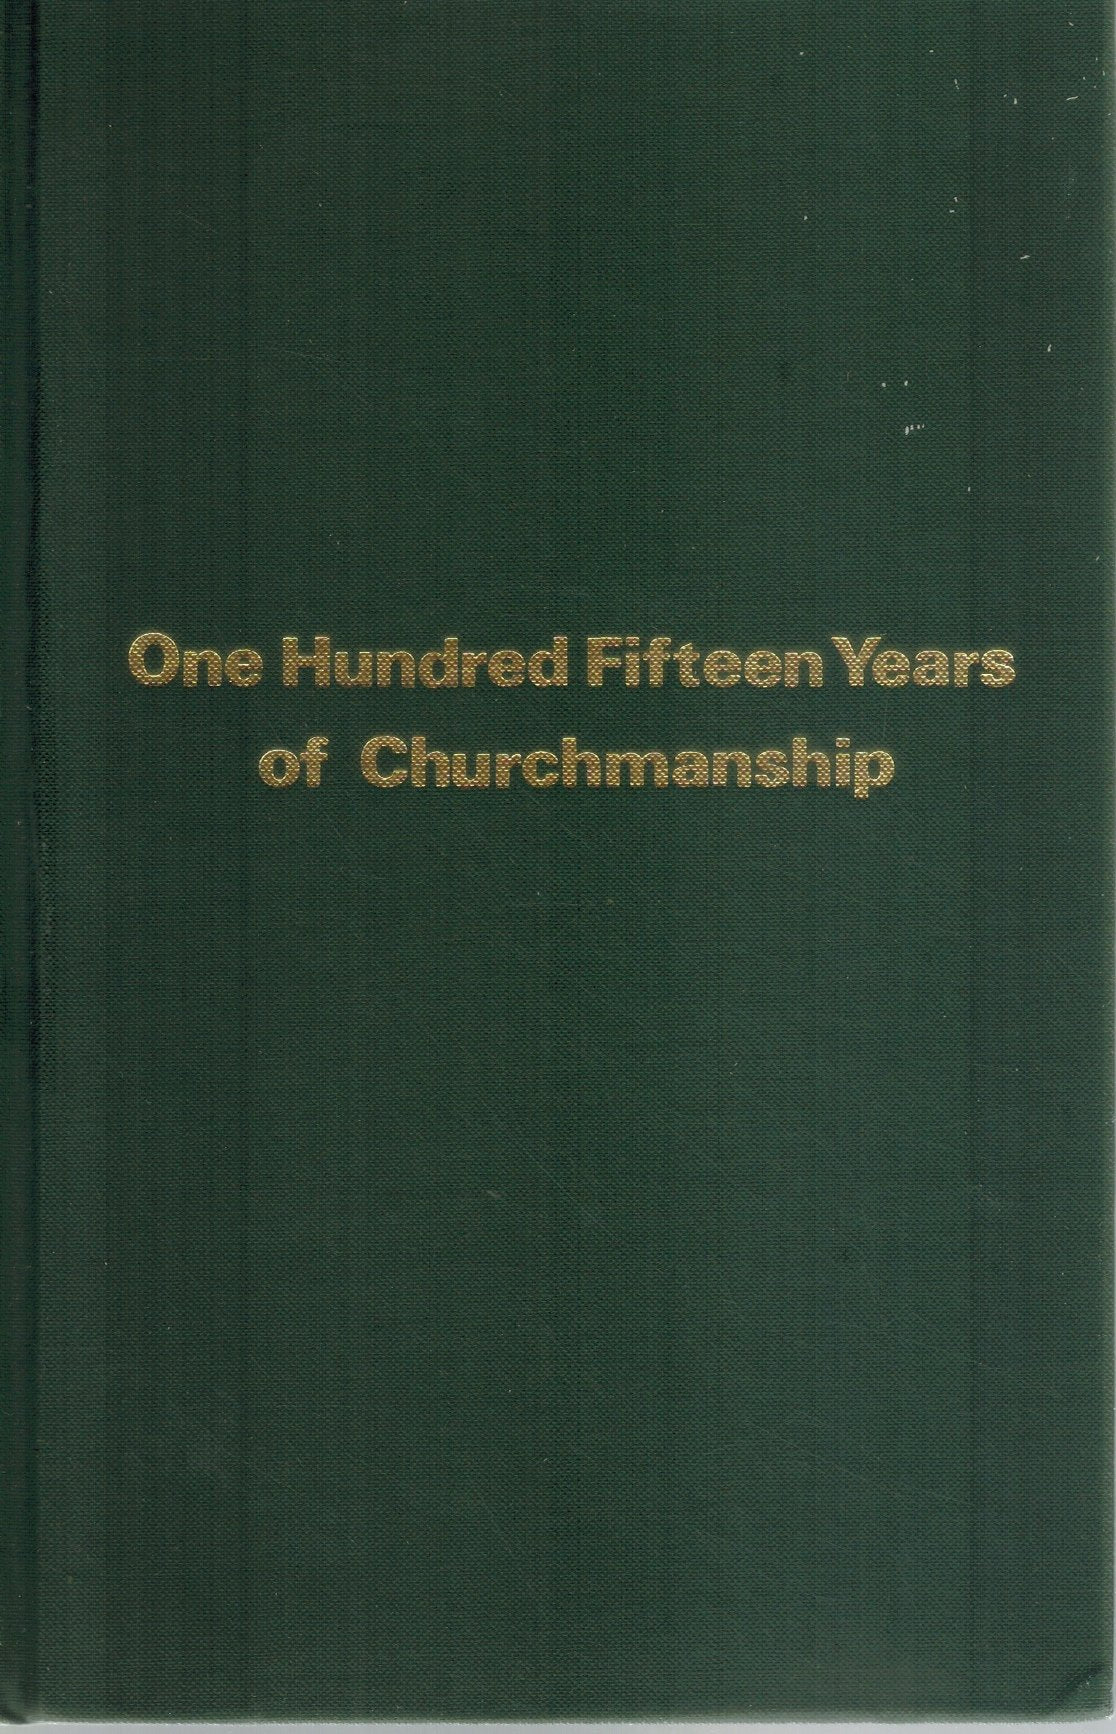 ONE HUNDRED FIFTEEN YEARS OF CHURCHMANSHIP  by The Unitarian Church, Bloomington, Illinois